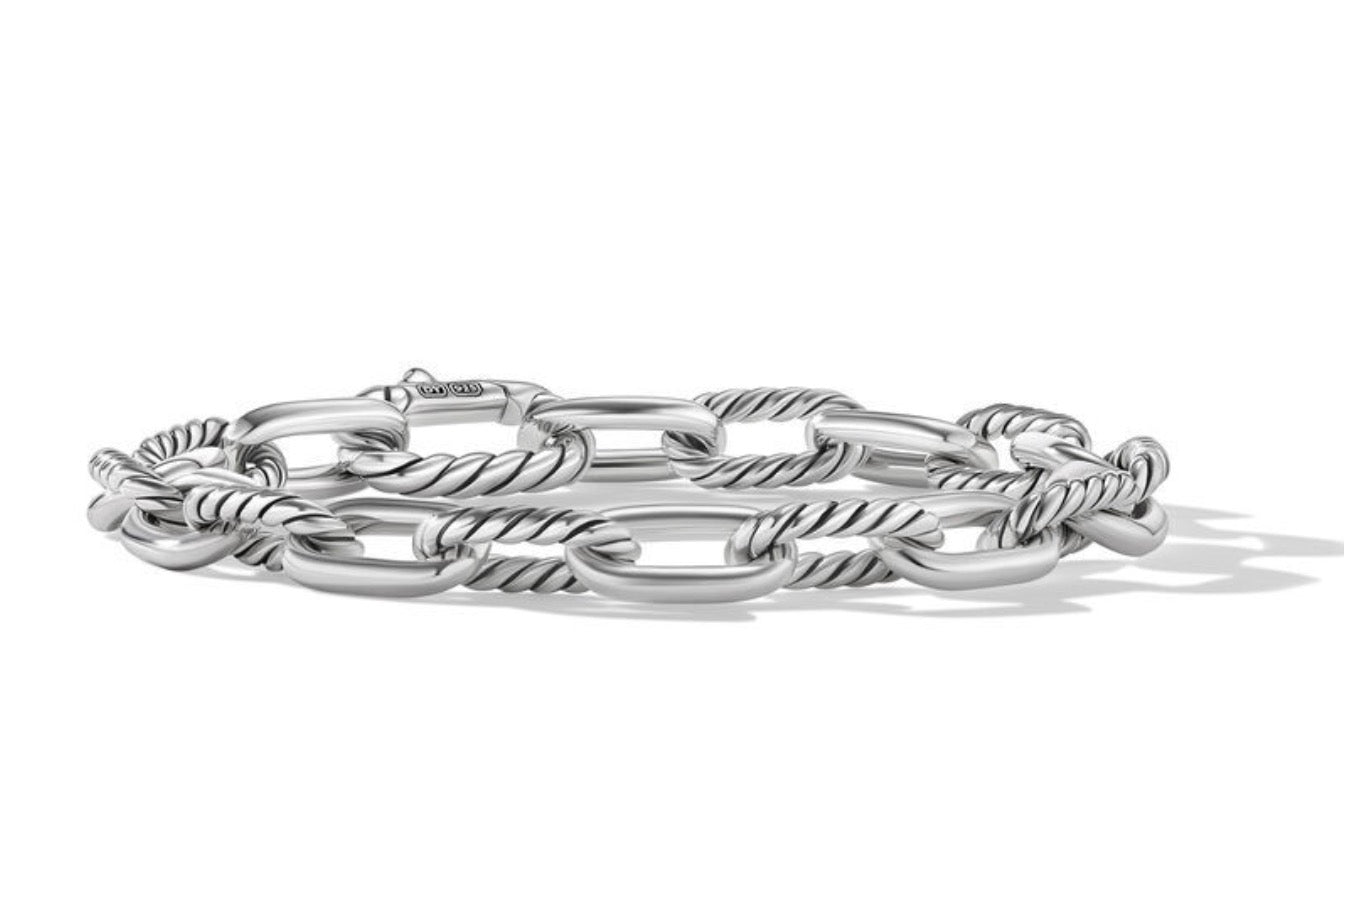 DY Madison® Chain Bracelet in Sterling Silver